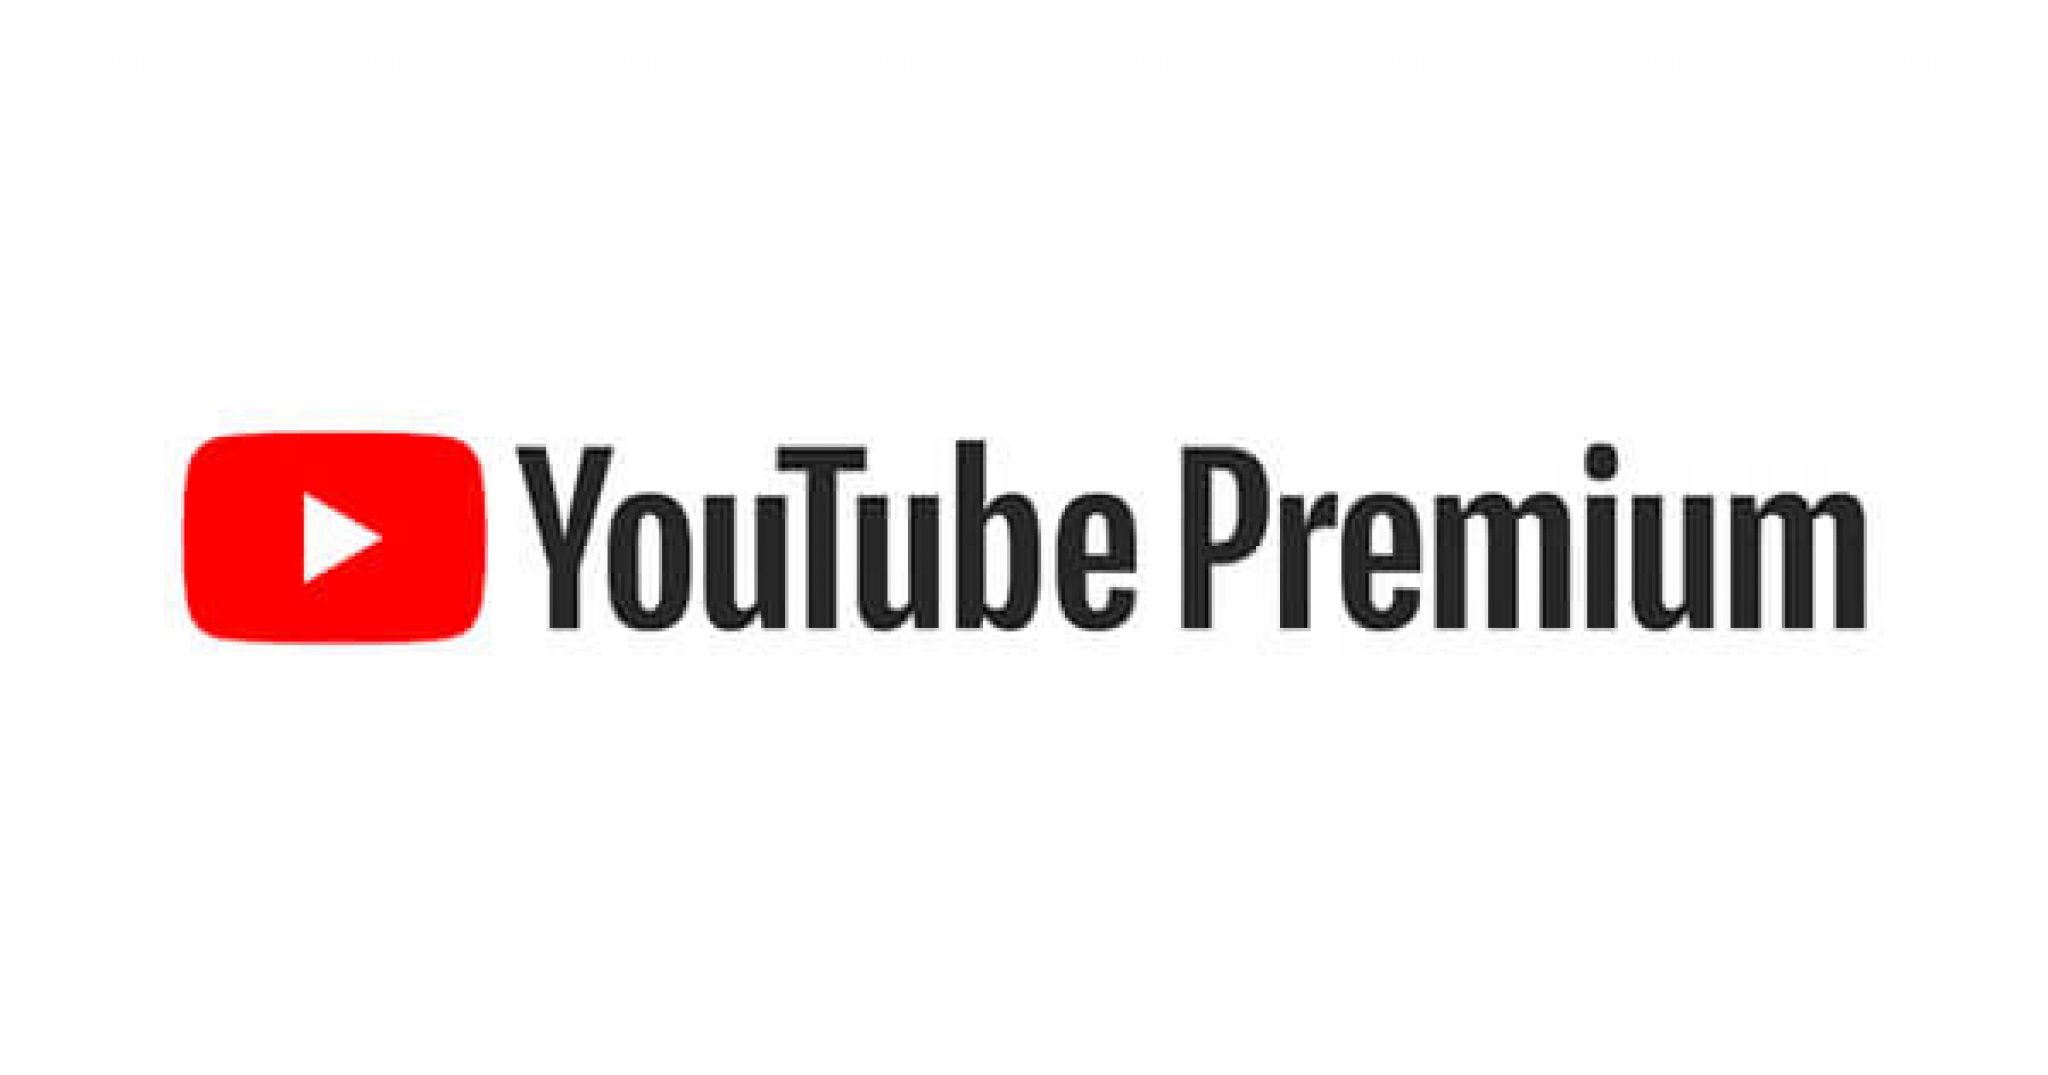 Get YouTube Premium for a Cheaper Price Pay Just Under 1.3 a Month!